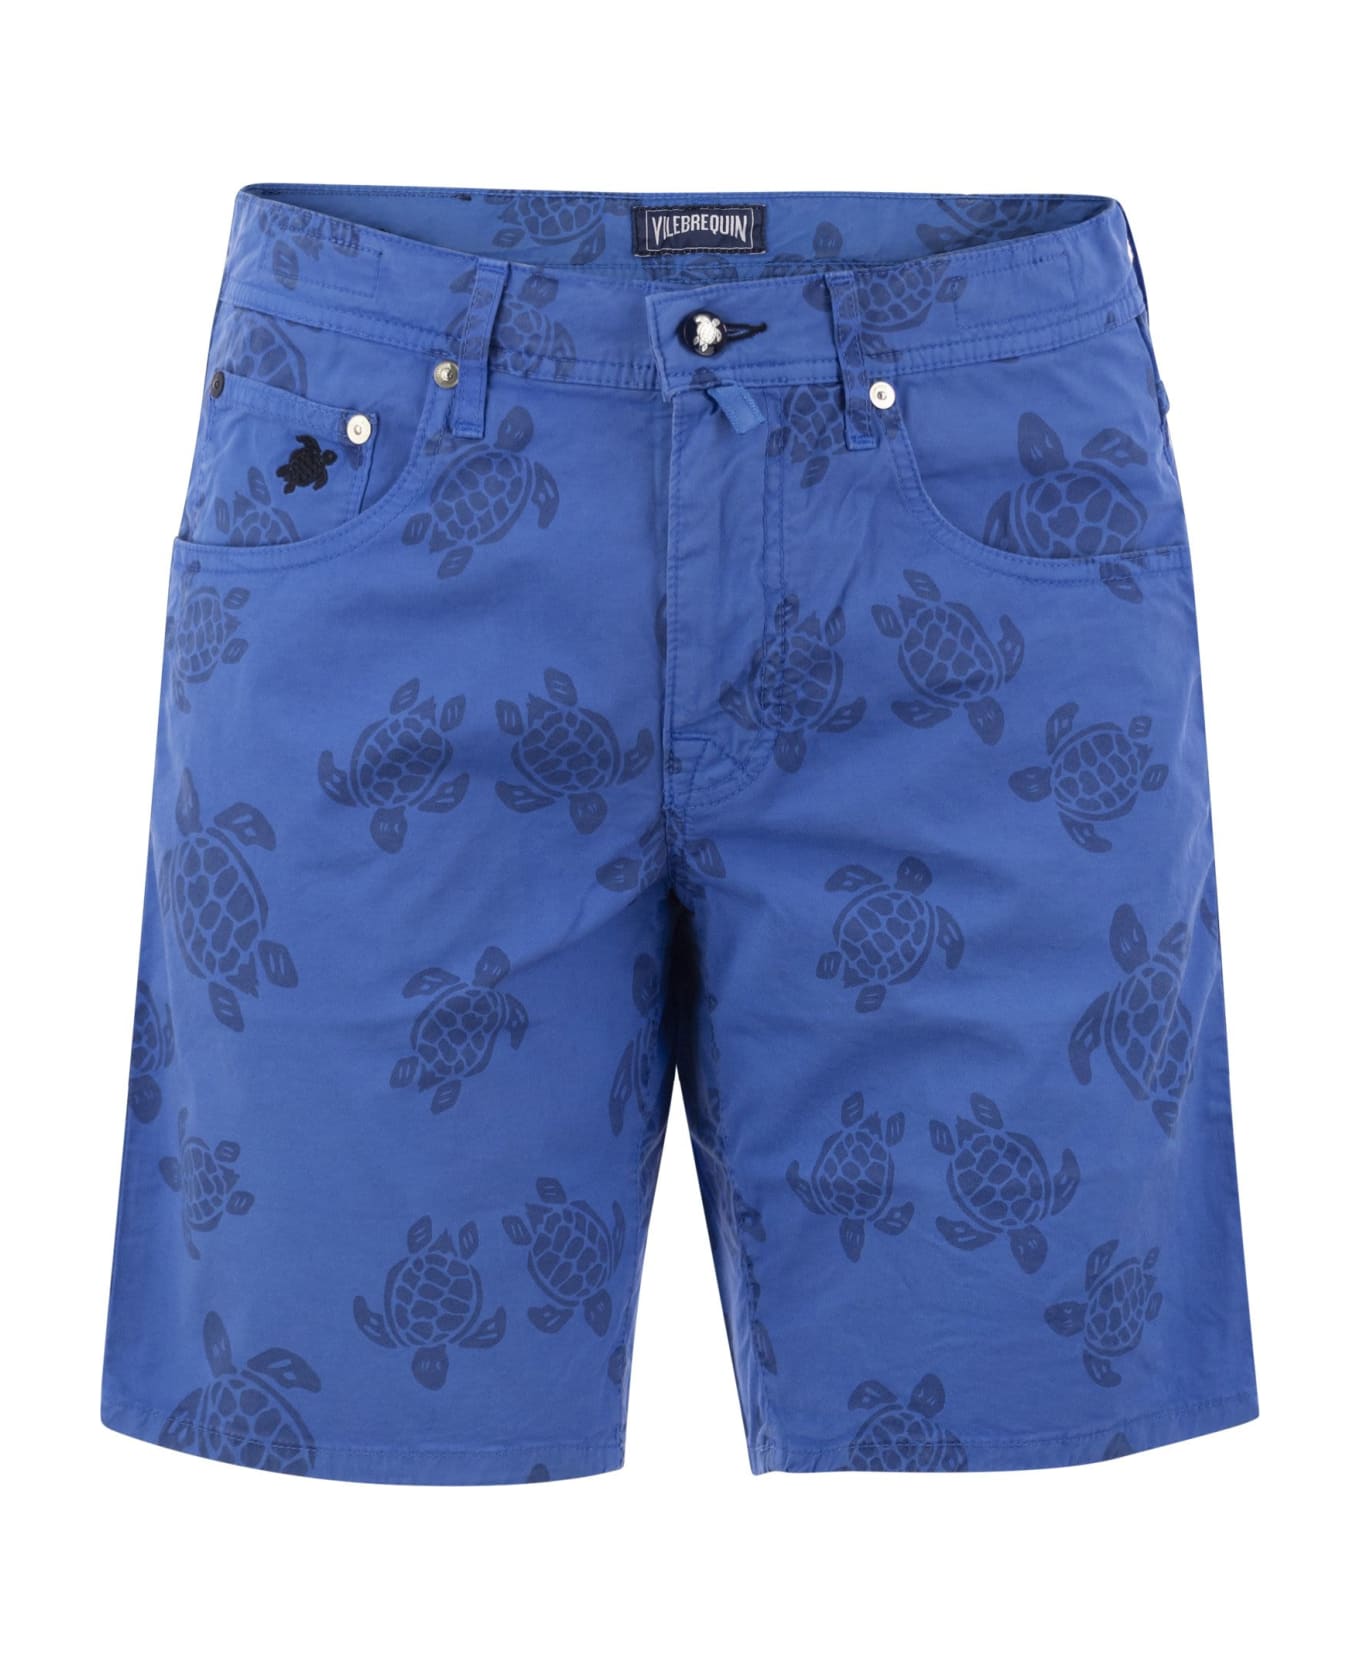 Vilebrequin Bermuda Shorts With Ronde Des Tortues Resin Print - Blue Marine